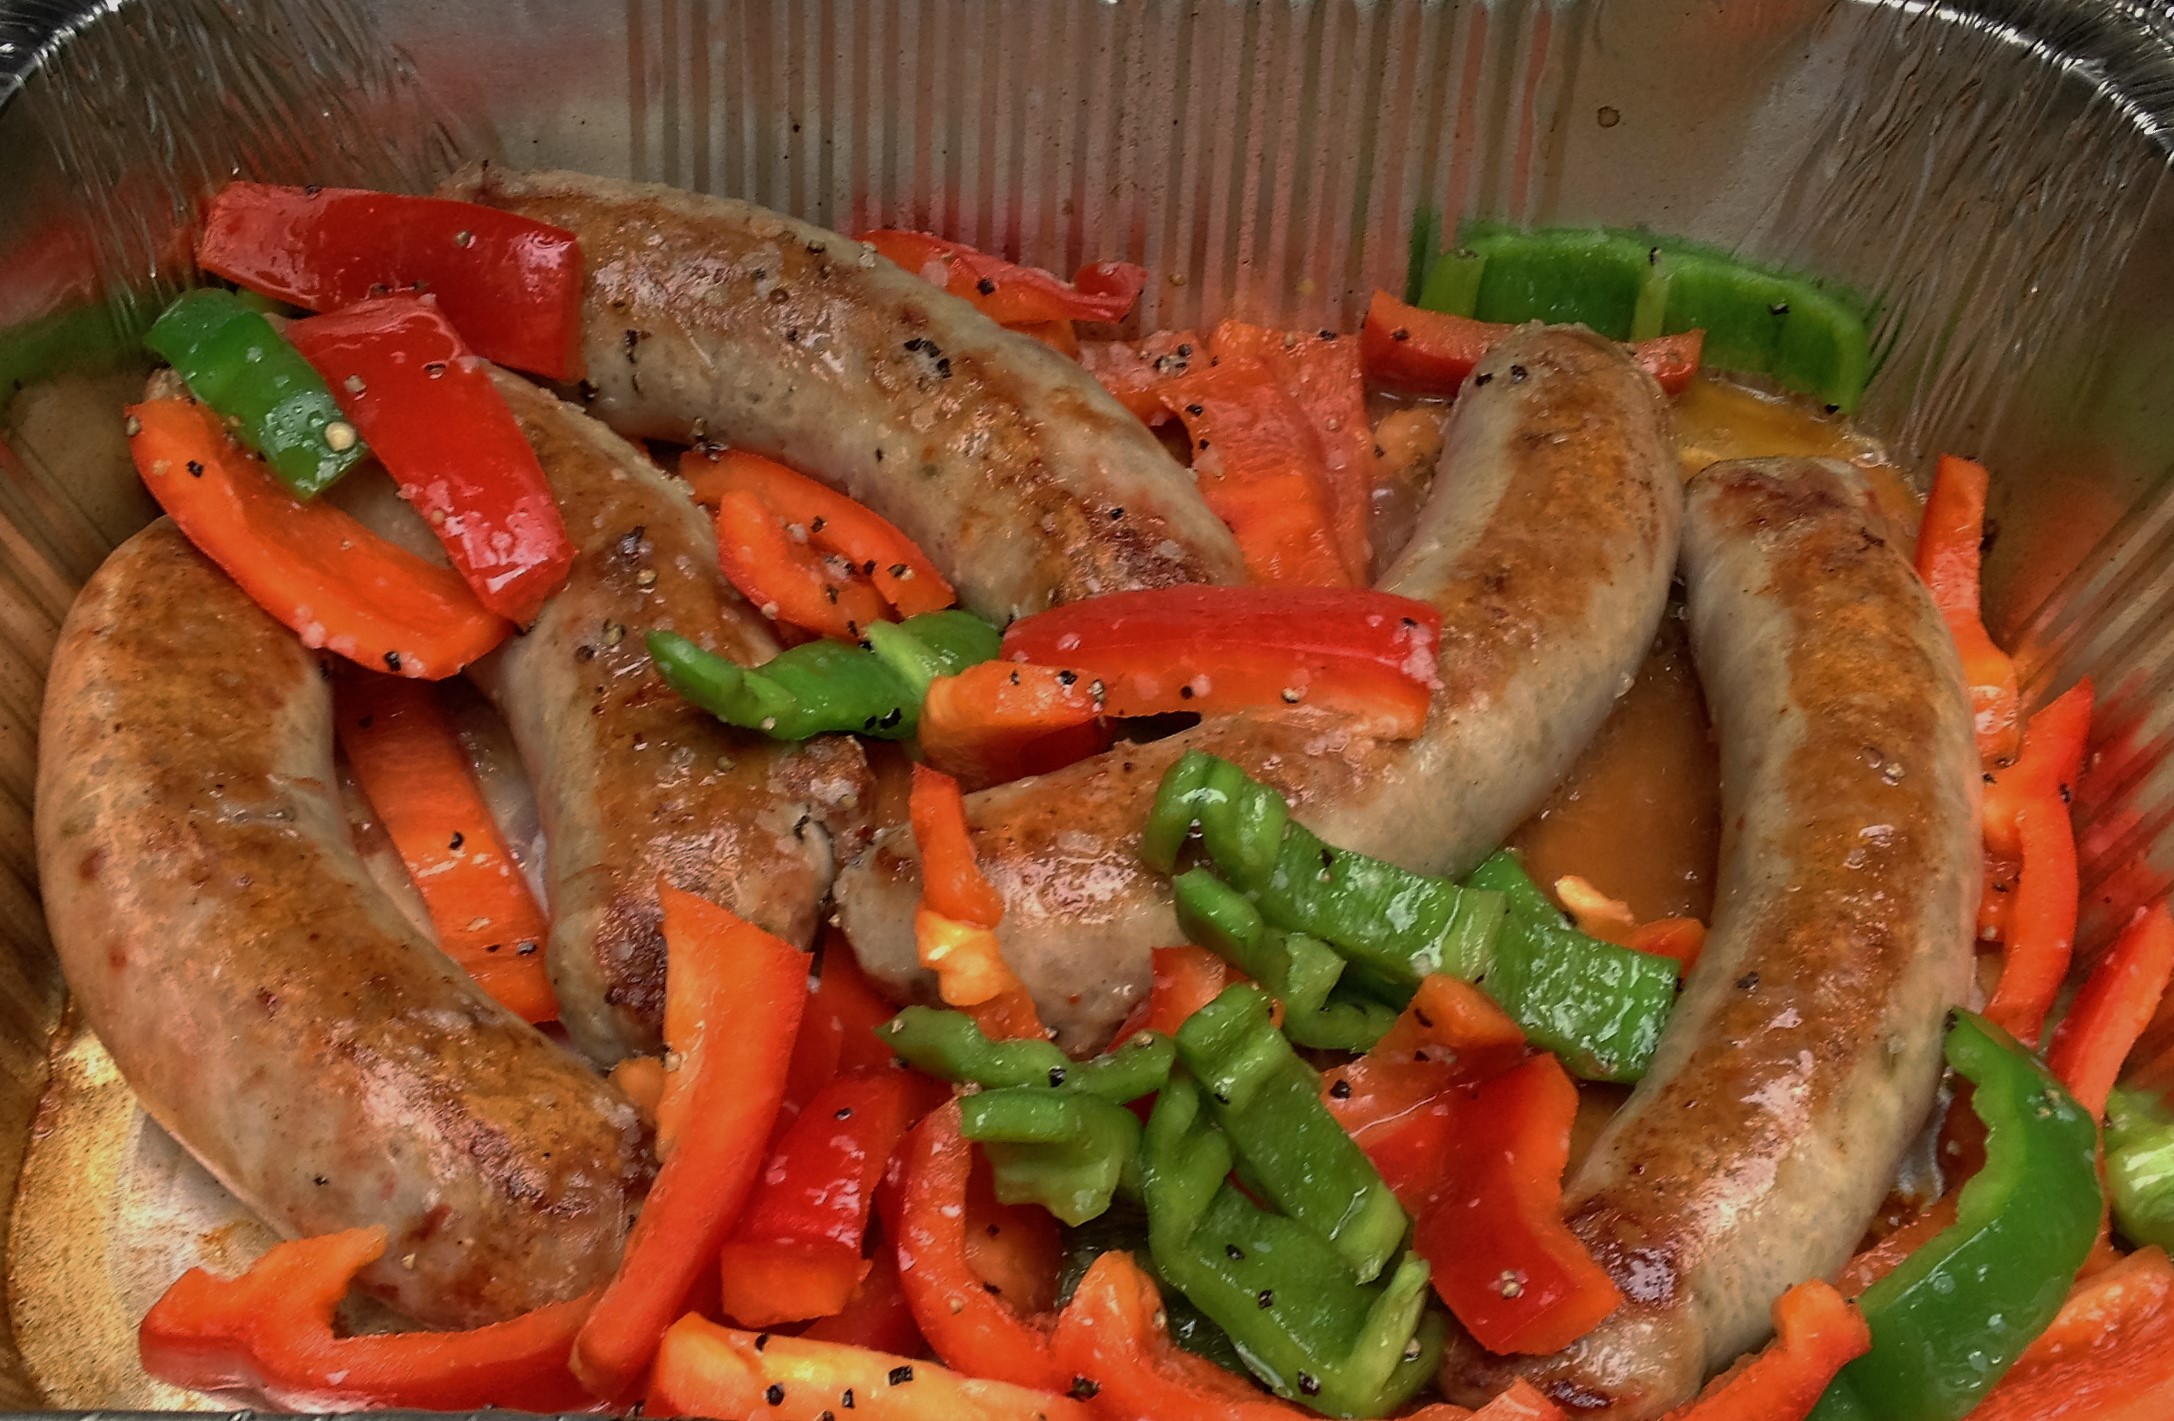 Grilled Peppers and Italian Sausage